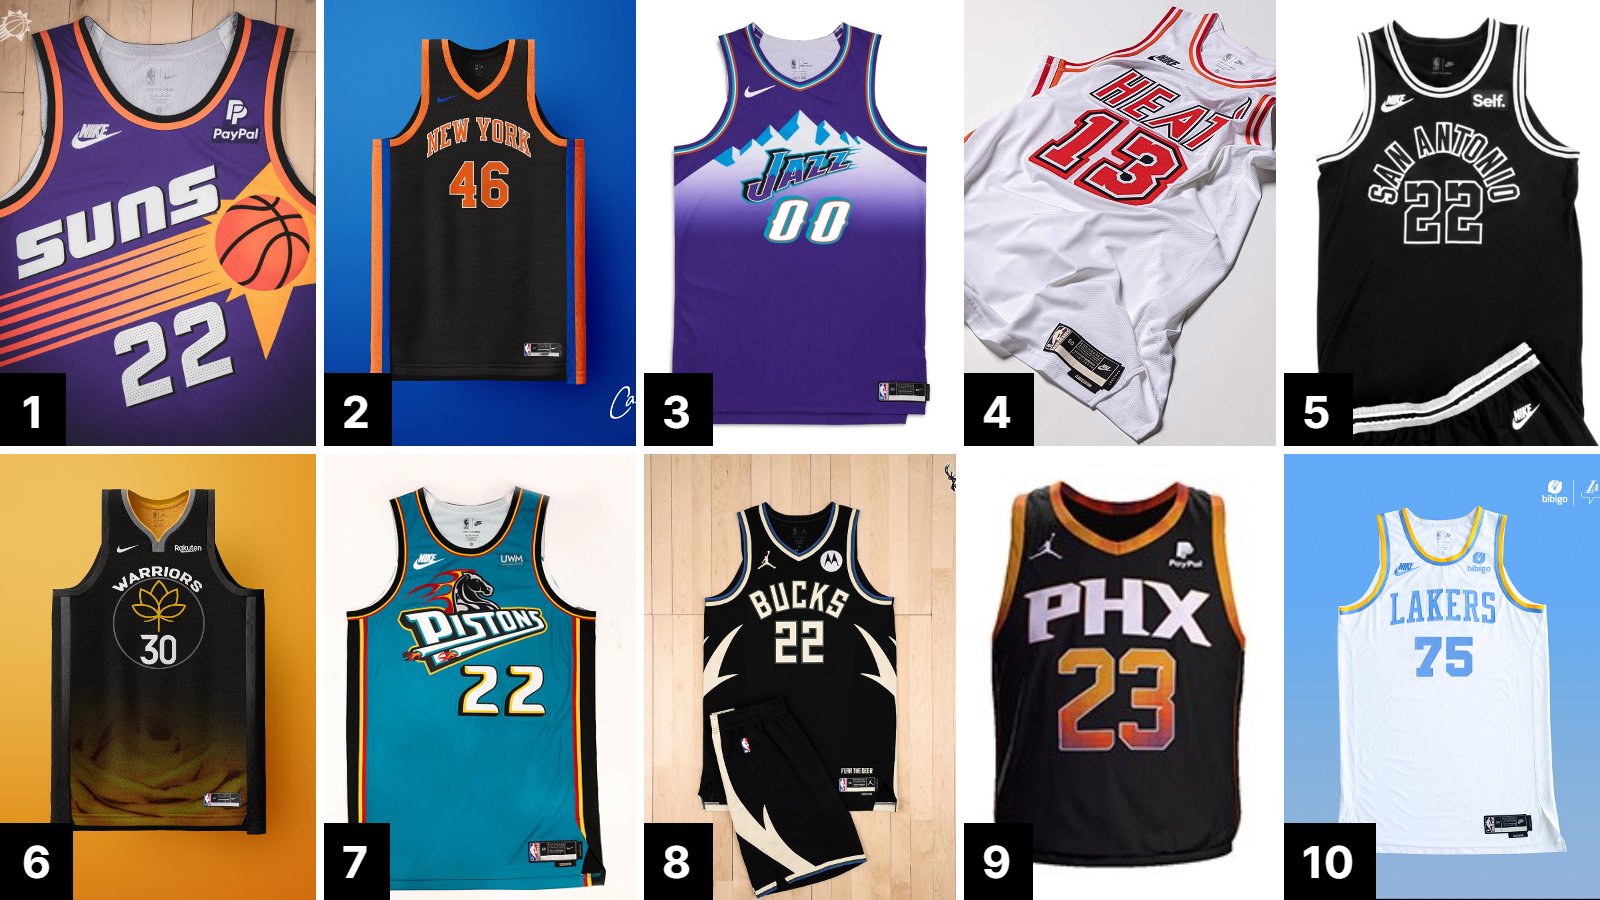 Top 10 Best Nba Jerseys in New York, NY - October 2023 - Yelp